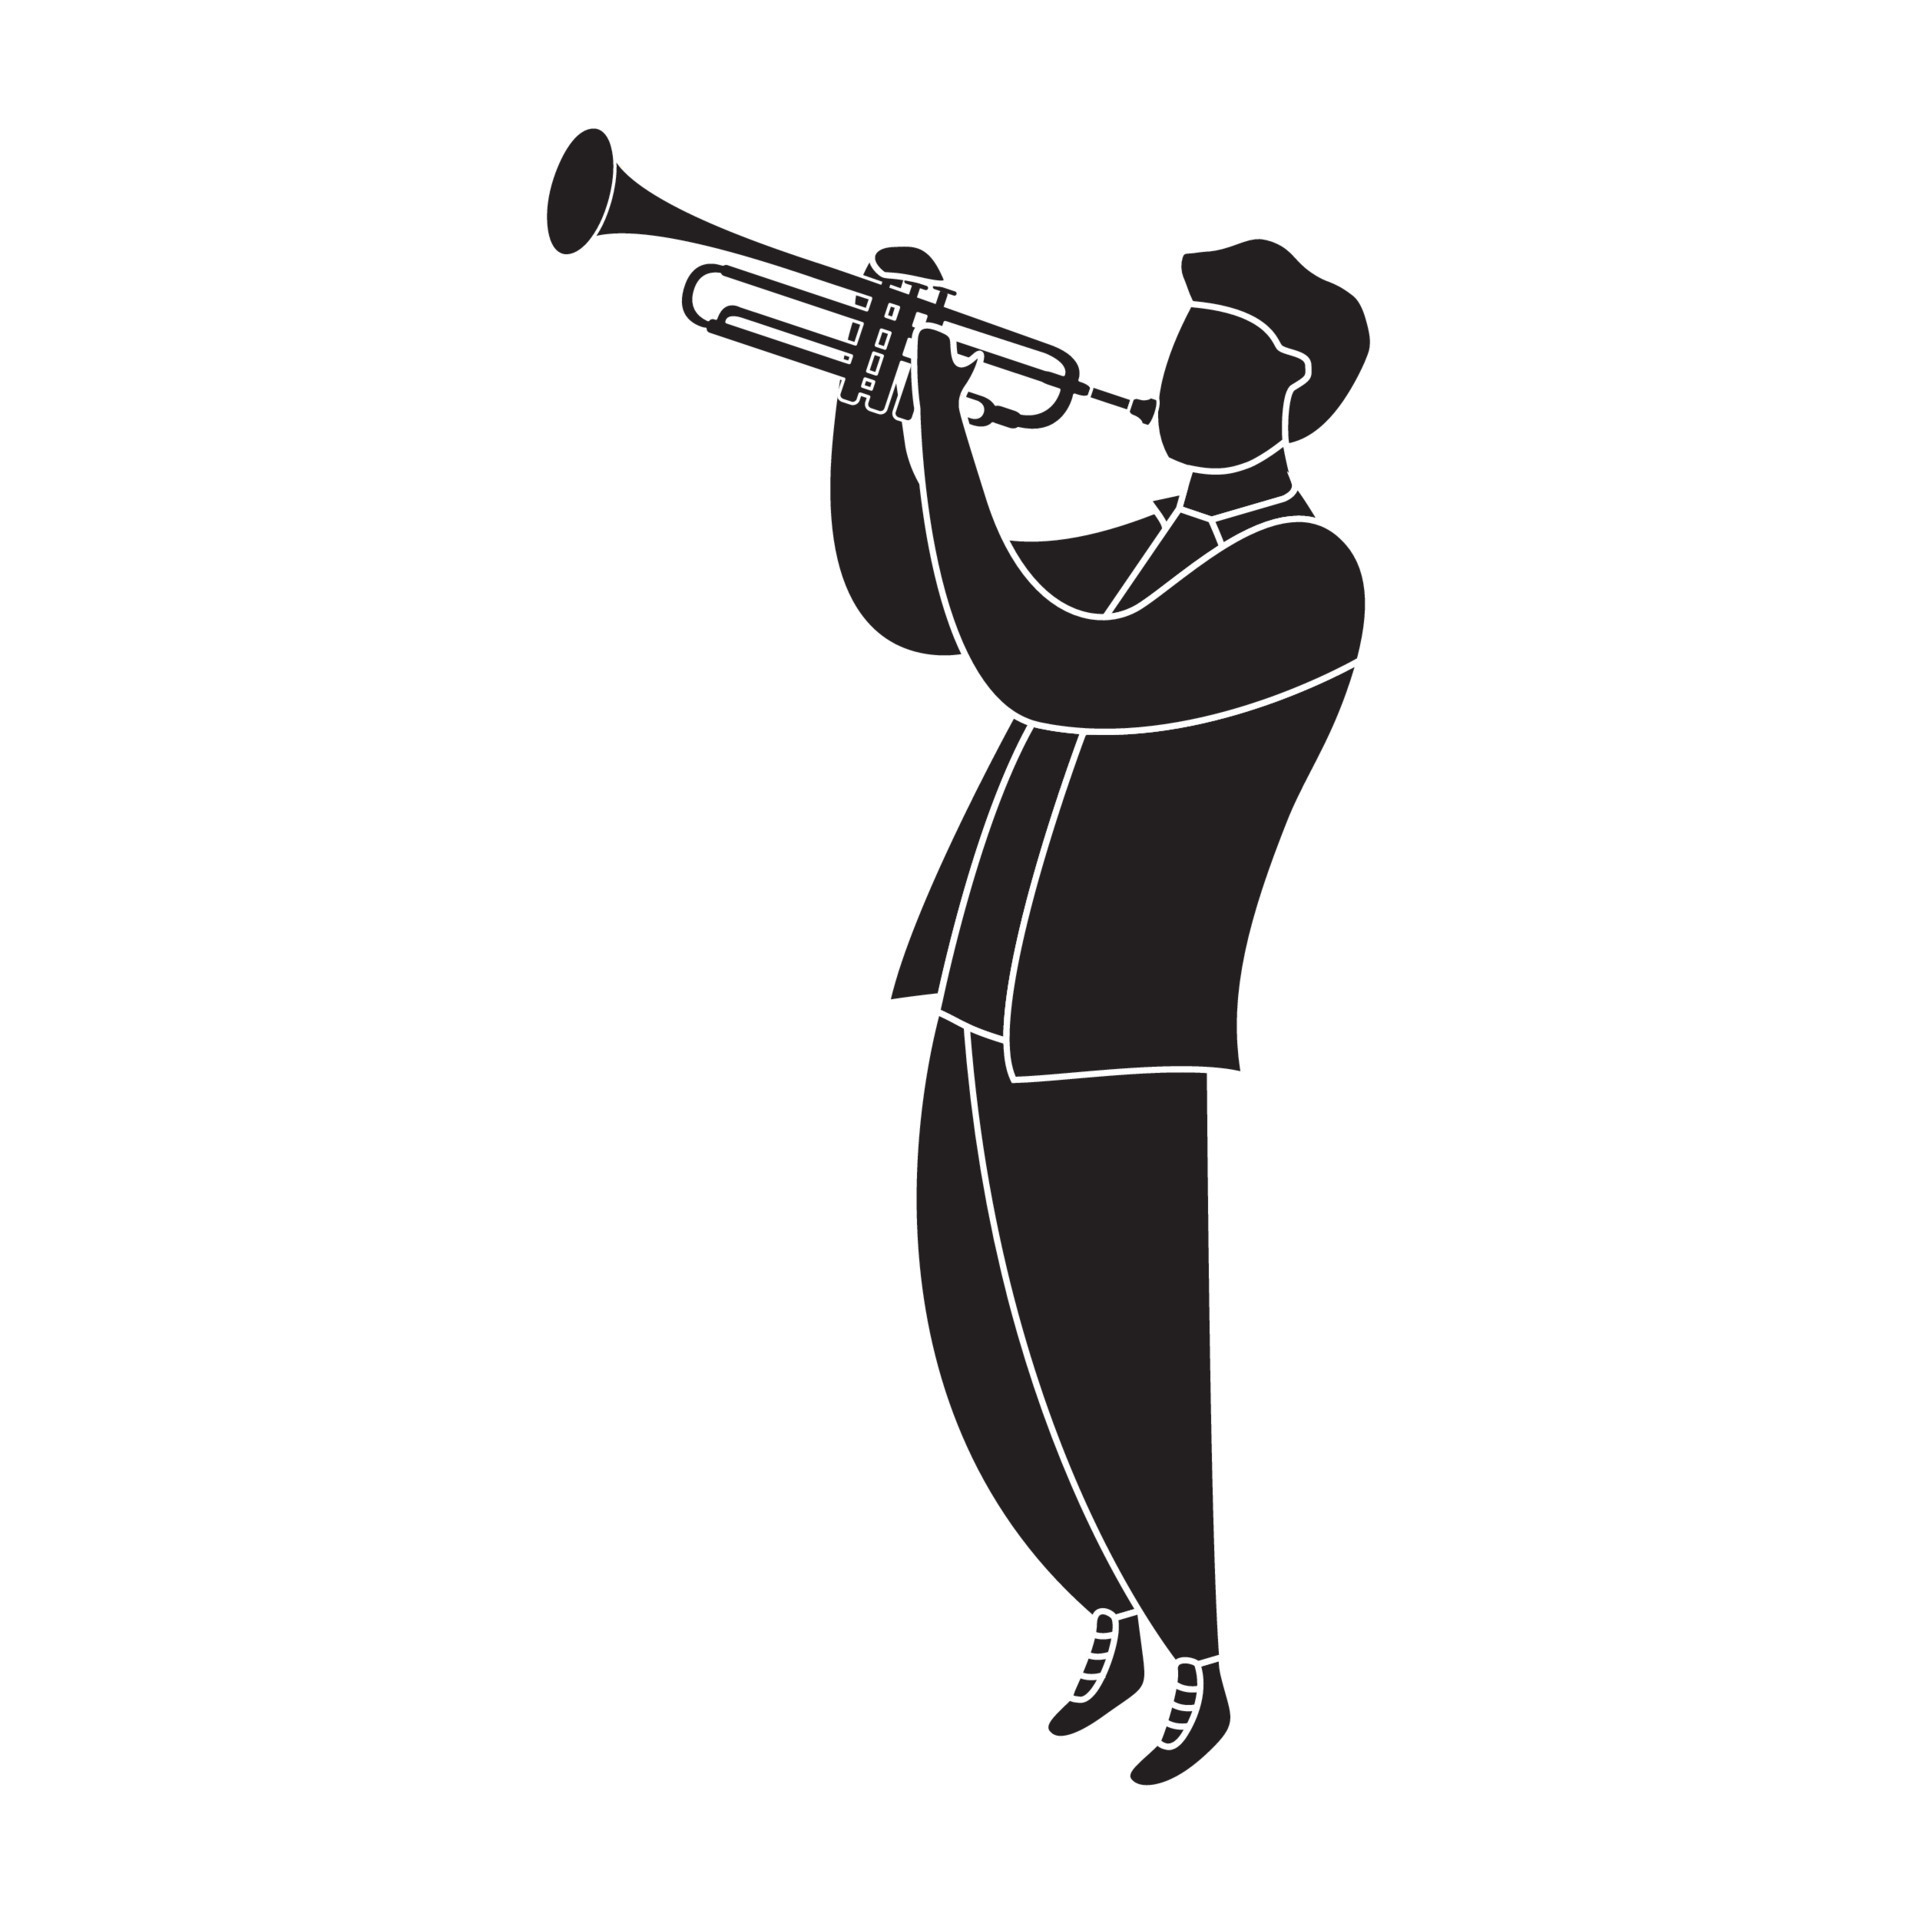 The black Silhouette man musician plays the trumpet. Modern flat